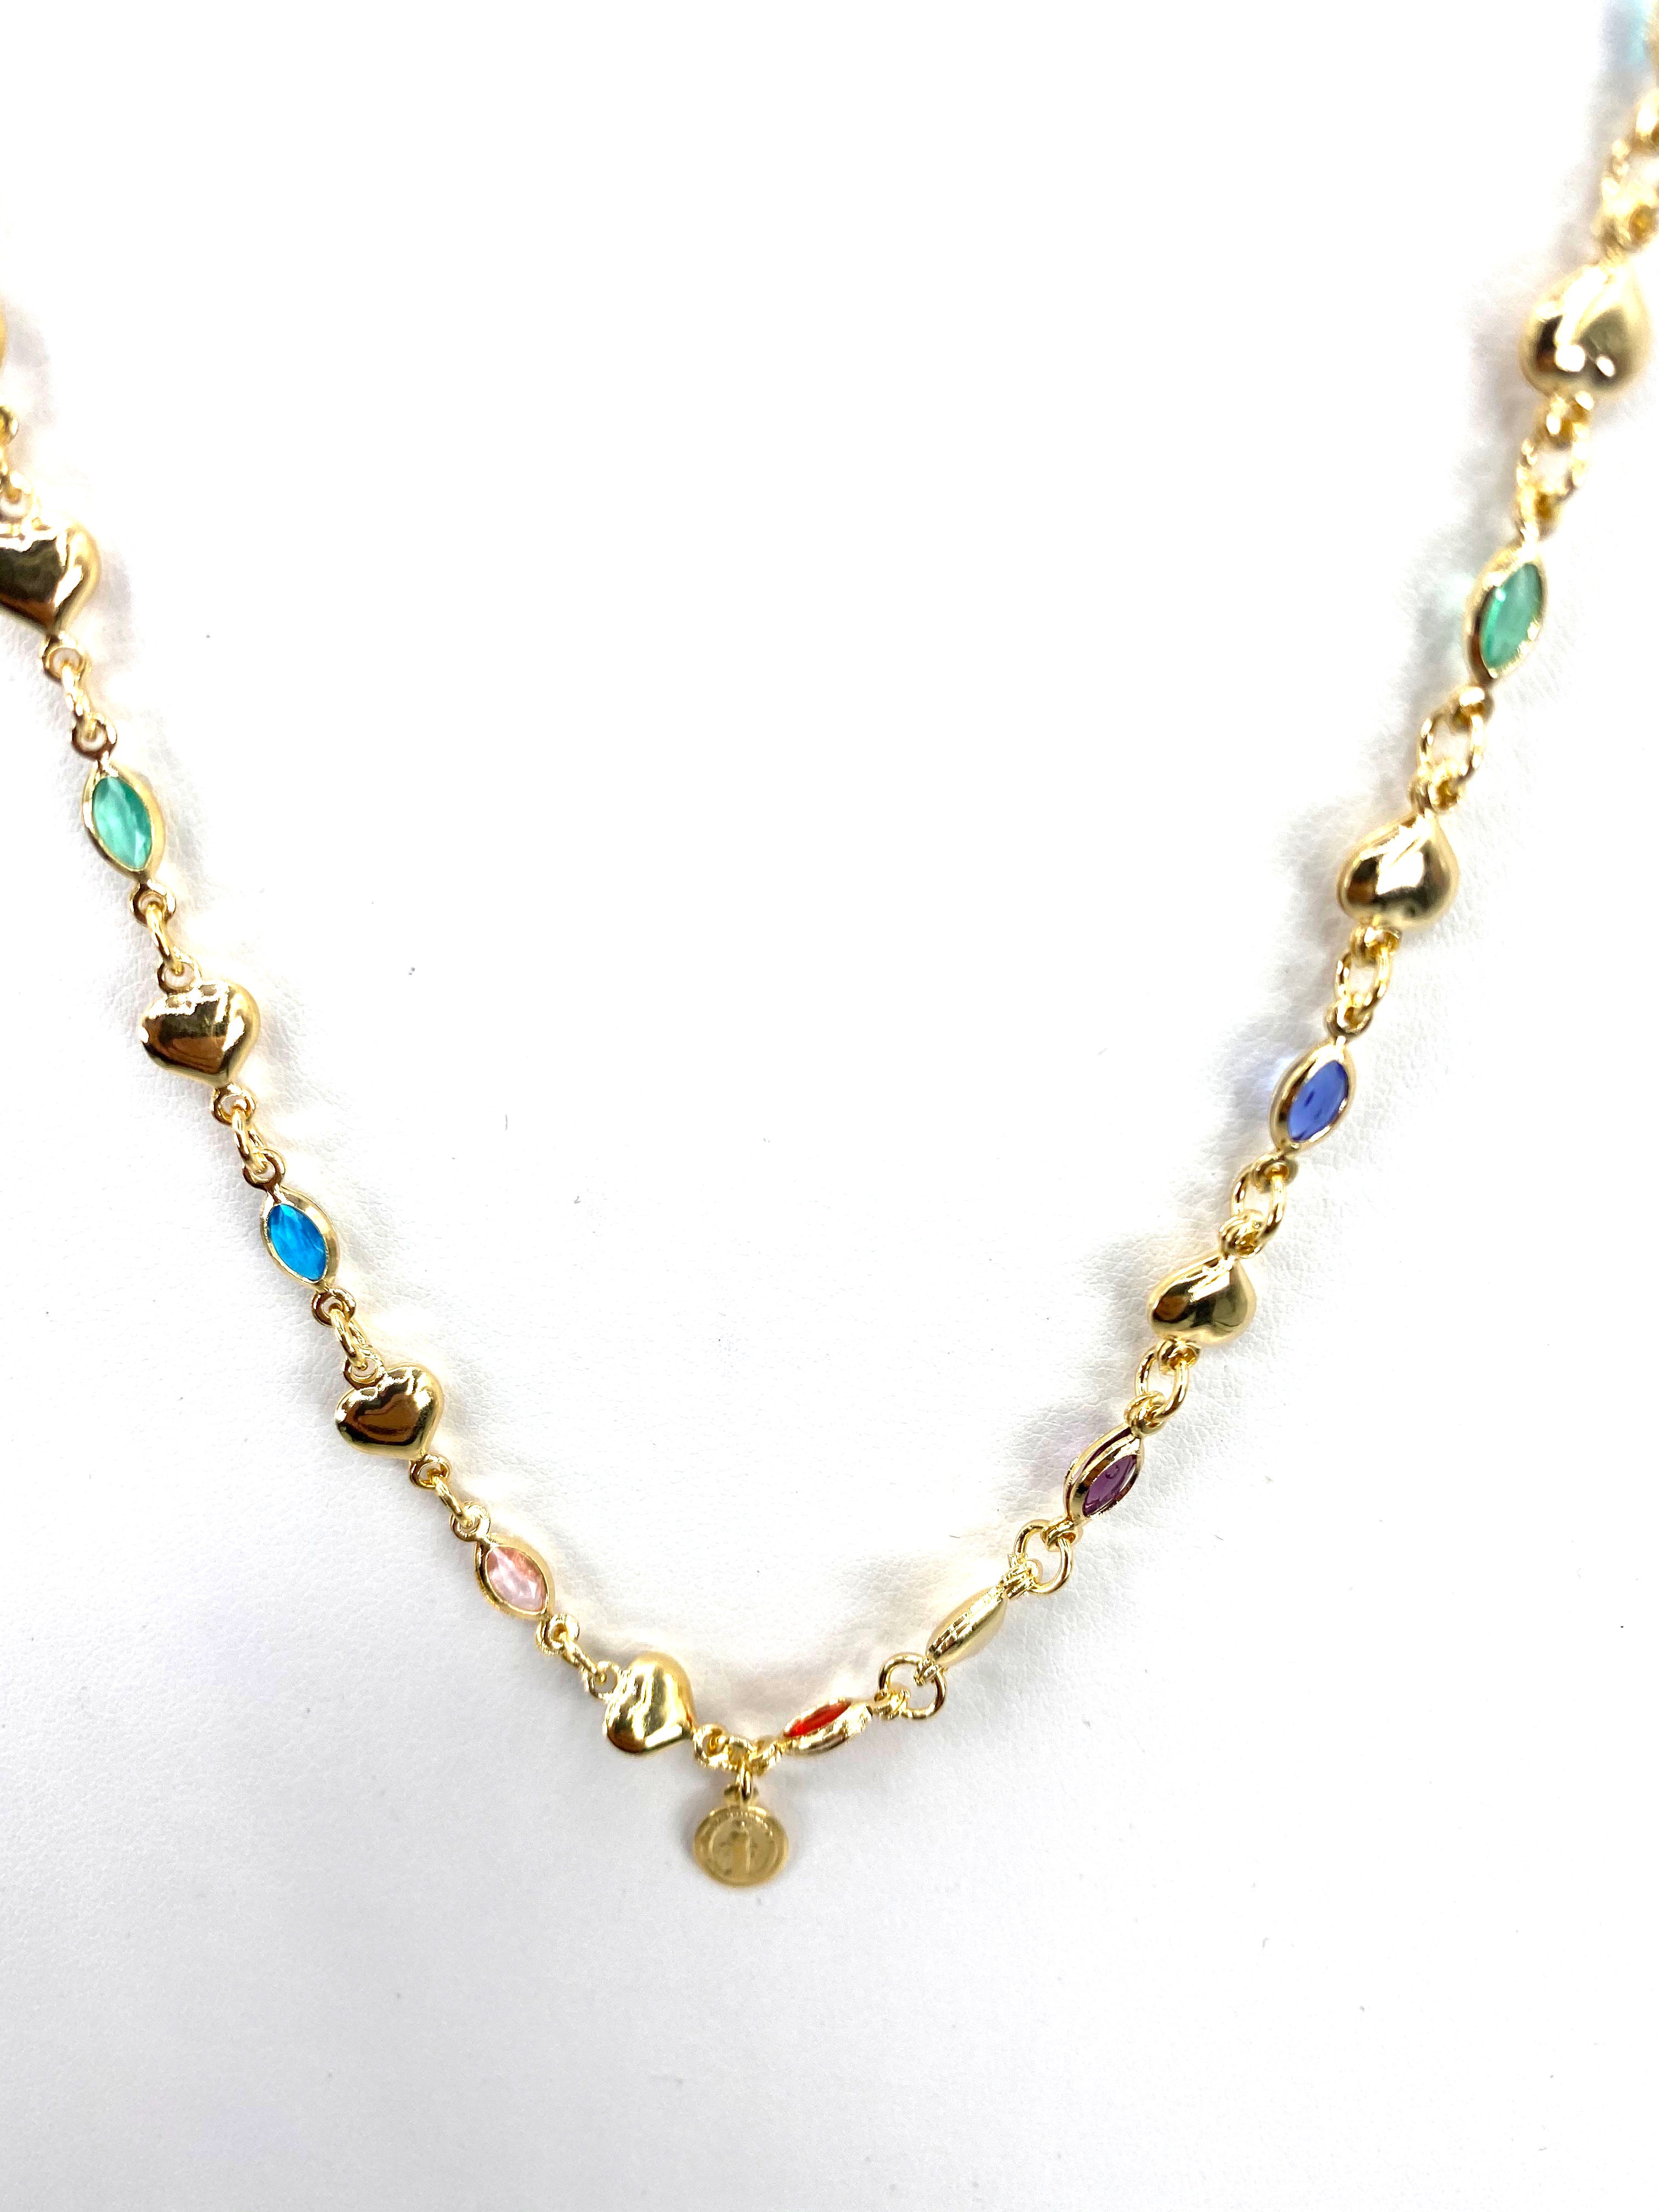 Necklace with color stones, hearts and Our Lady of Grace